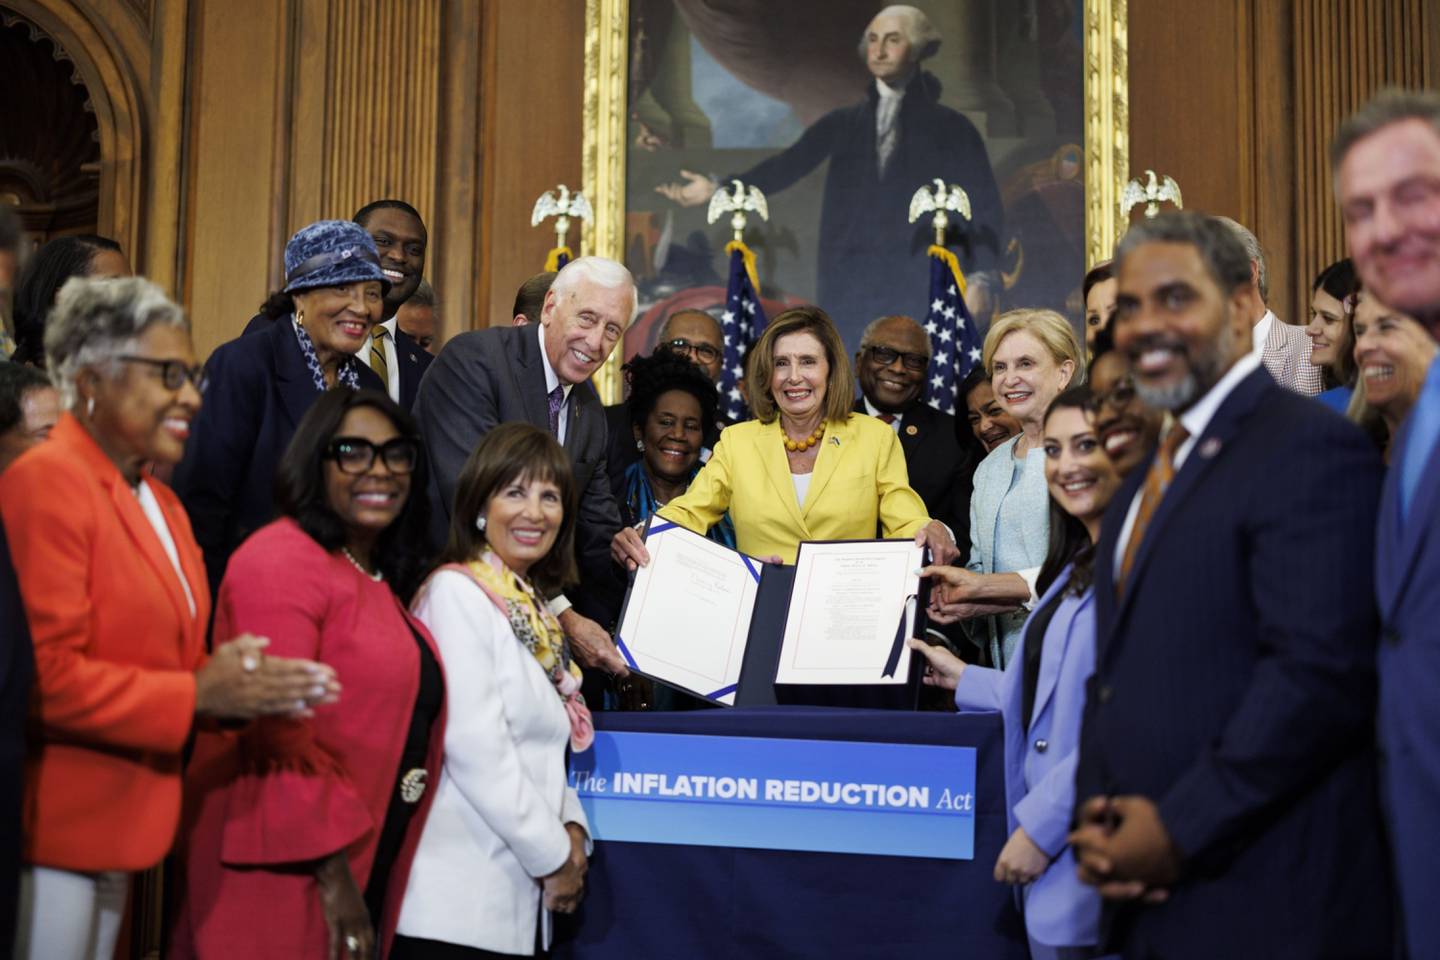 US House Speaker Nancy Pelosi holds the signed Inflation Reduction Act of 2022 during a bill enrolment ceremony at the US Capitol in Washington. Bloomberg